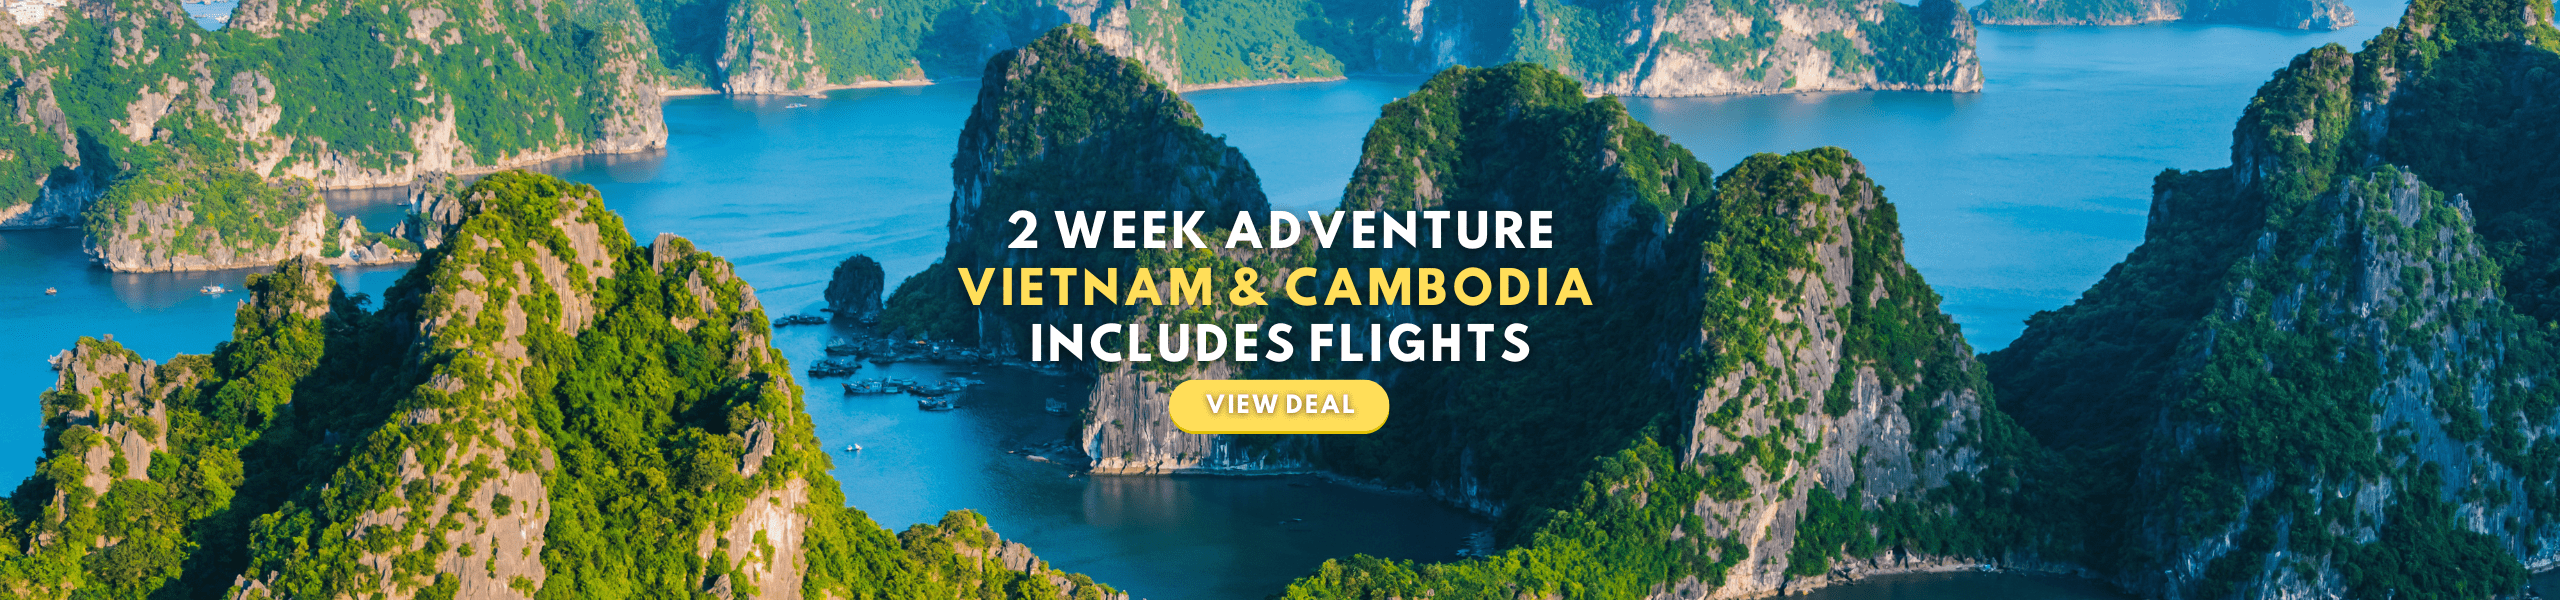 Vietnam and Cambodia Tour with Flights 